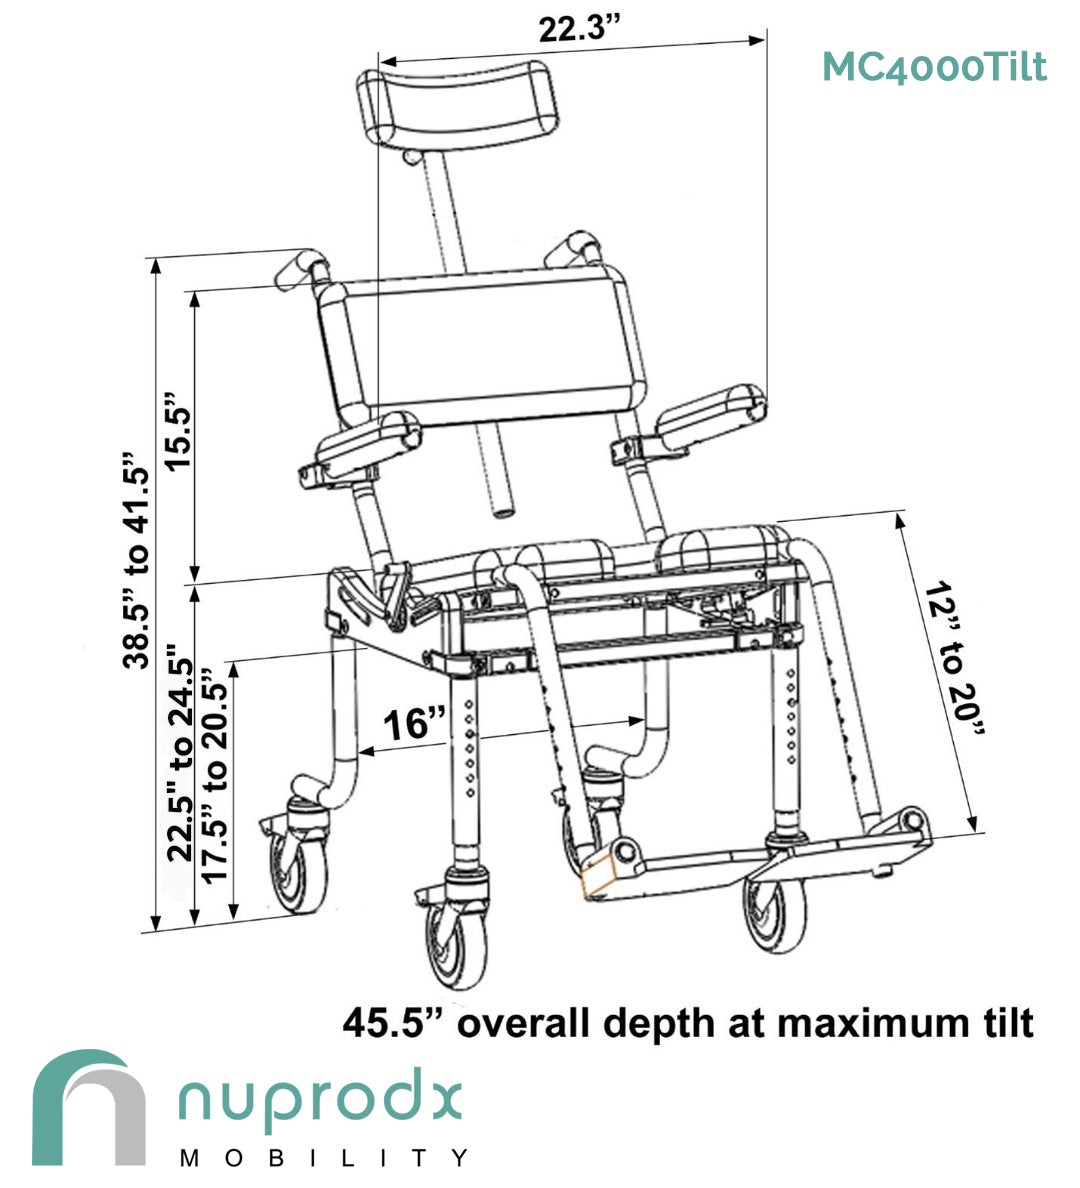 Nuprodx MC4000Tilt - Tilt-in-space Shower Chair and Commode Chair